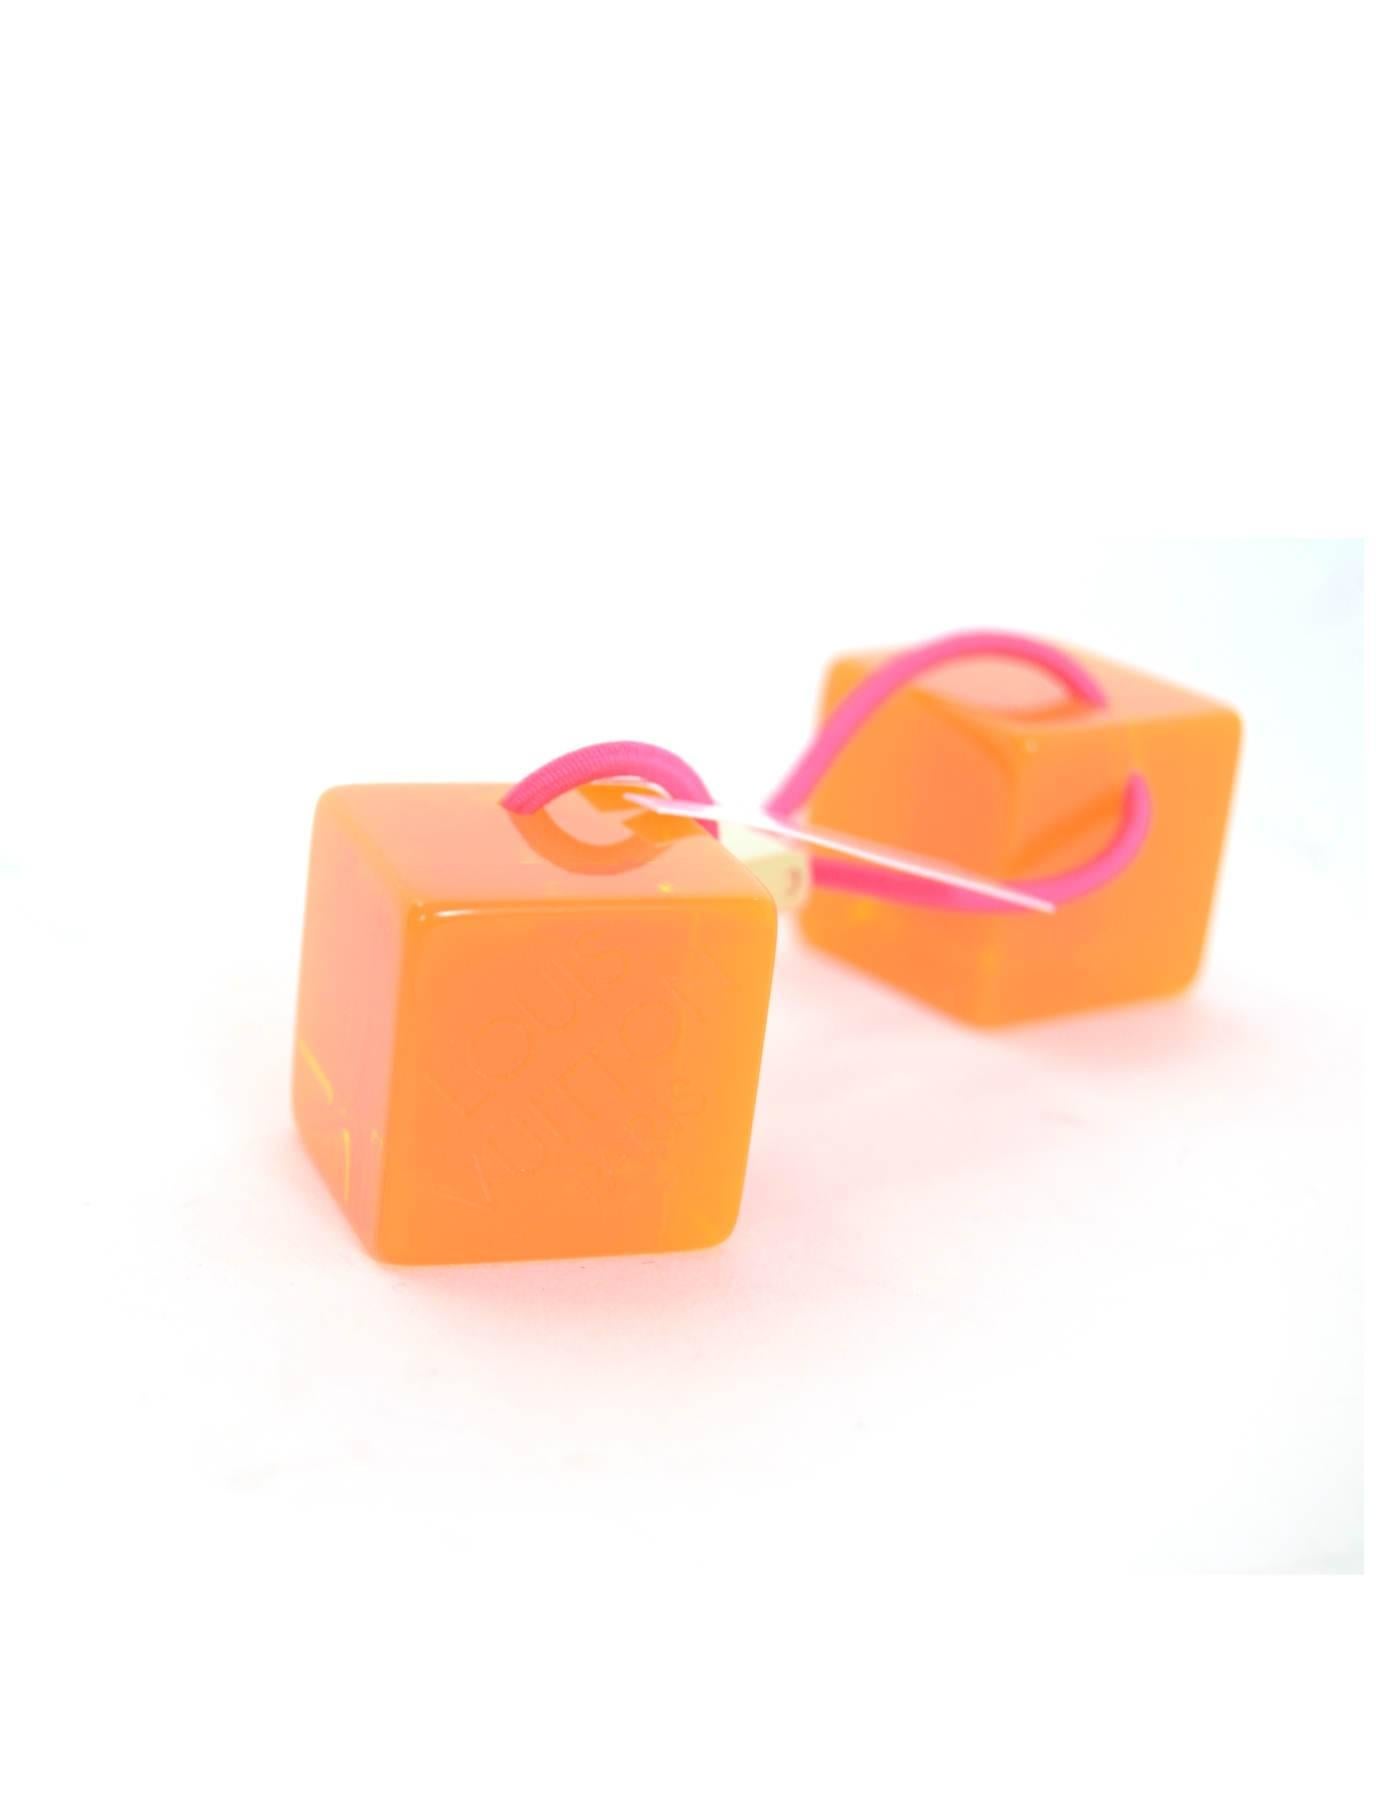 Louis Vuitton Orange Lucite Hair Cubes NIB

Made In: Italy
Color: Orange
Hardware: Goldtone
Materials: Lucite, brass, elasticized band
Retail Price: $295 + tax
Overall Condition: Excellent pre-owned condition - NIB
Included: Louis Vuitton